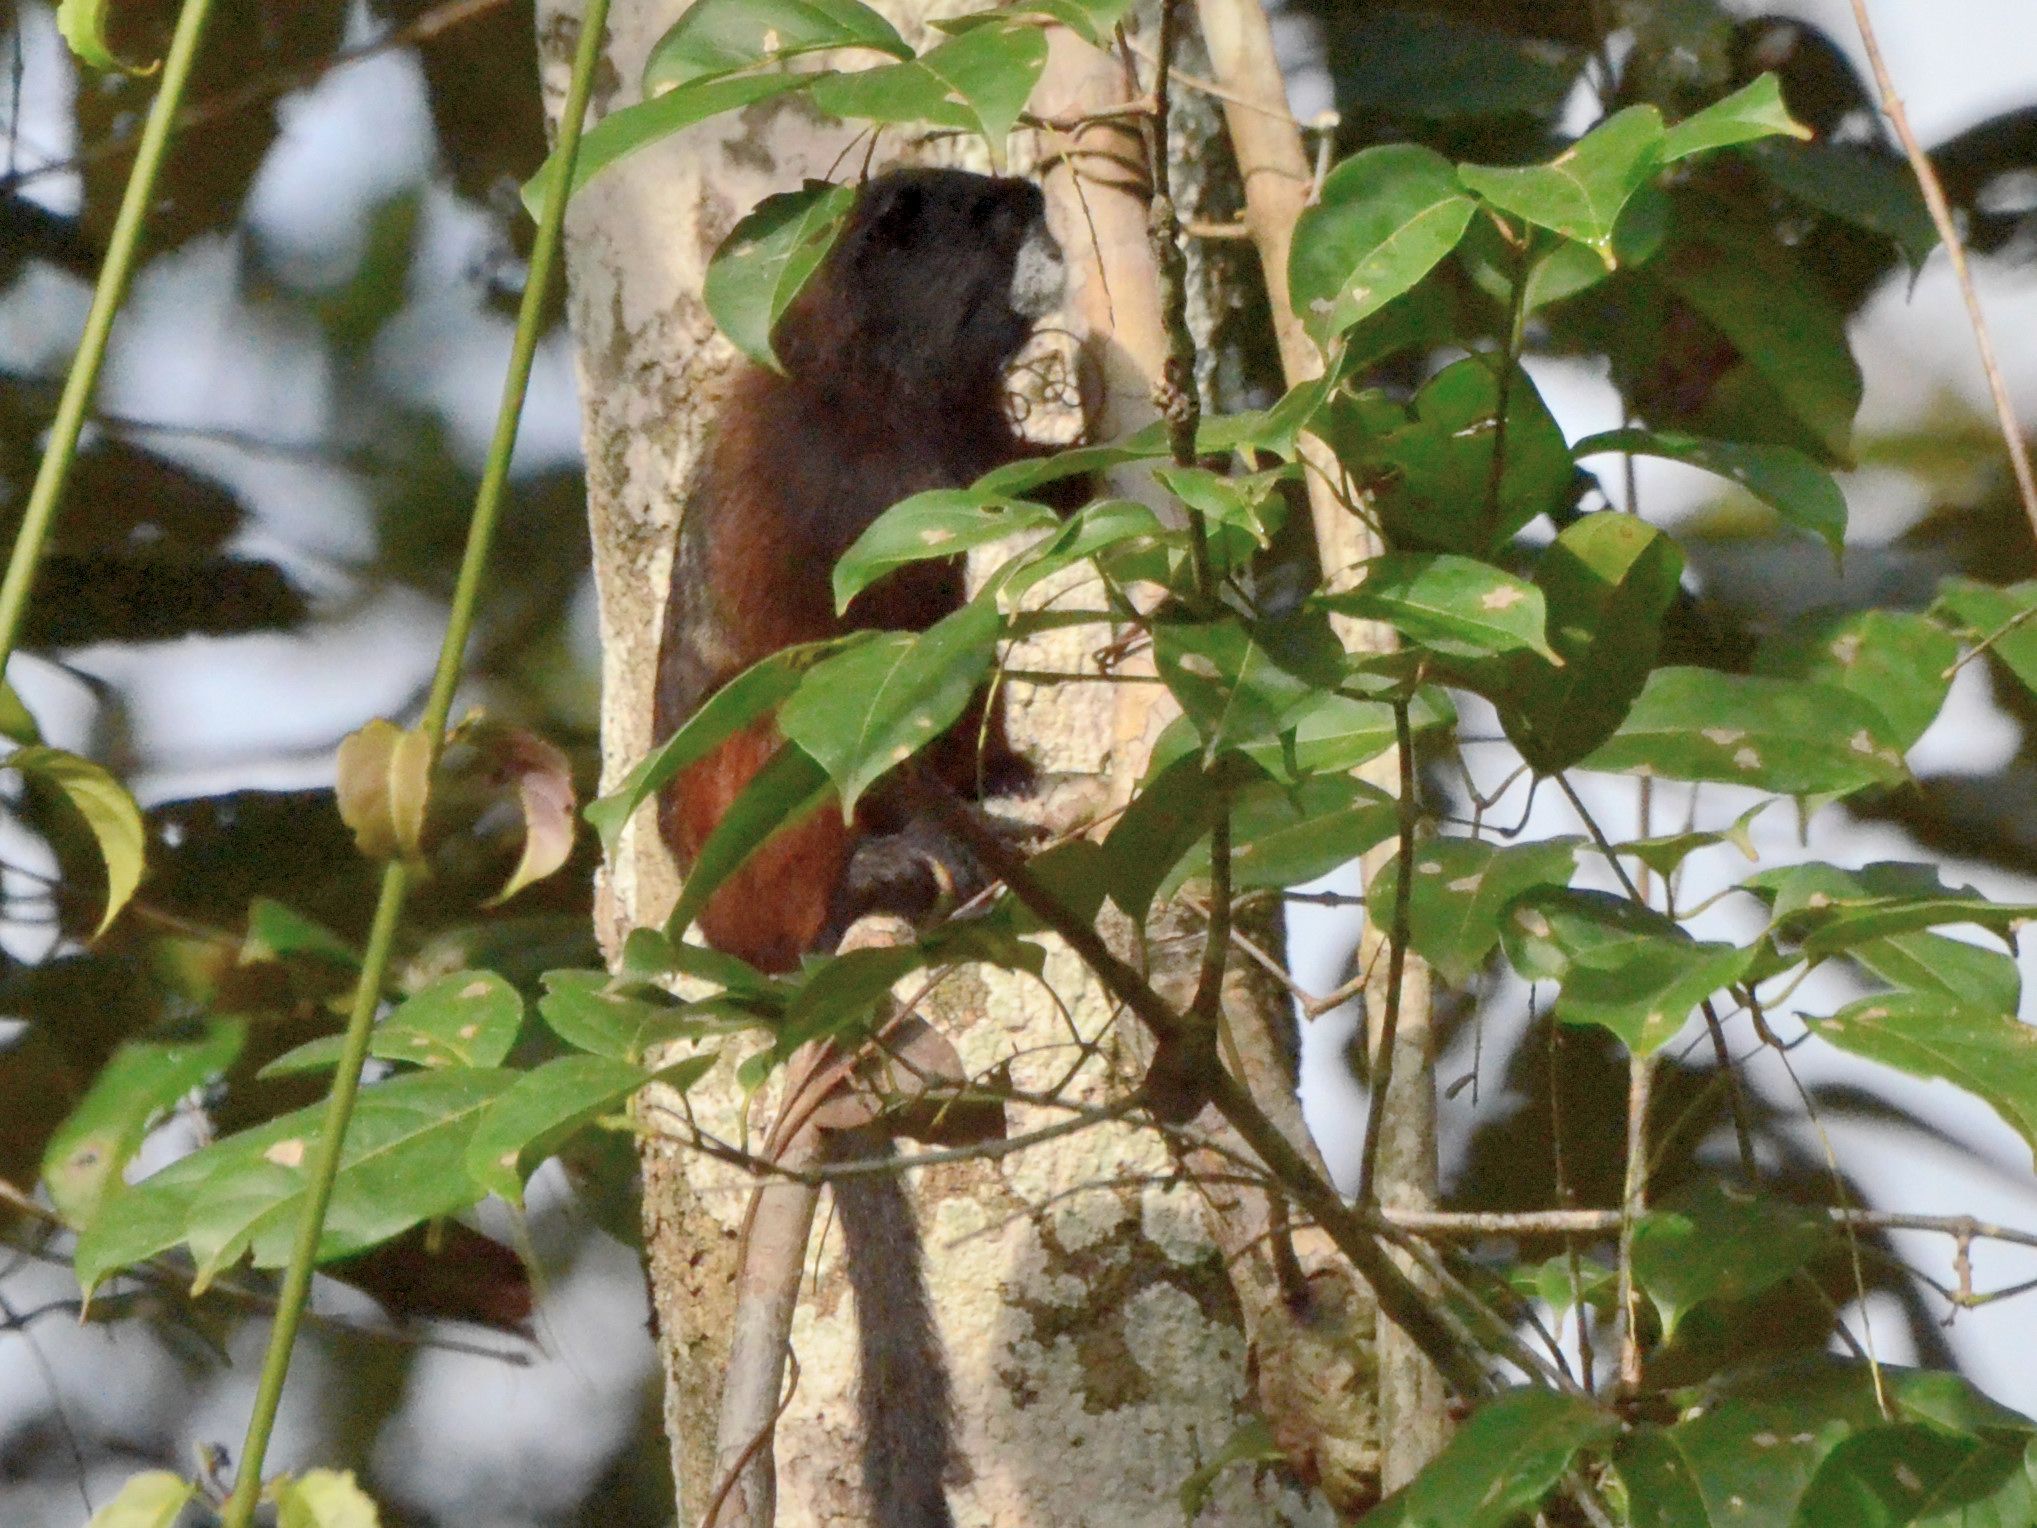 Click picture to see more Saddleback Tamarins.